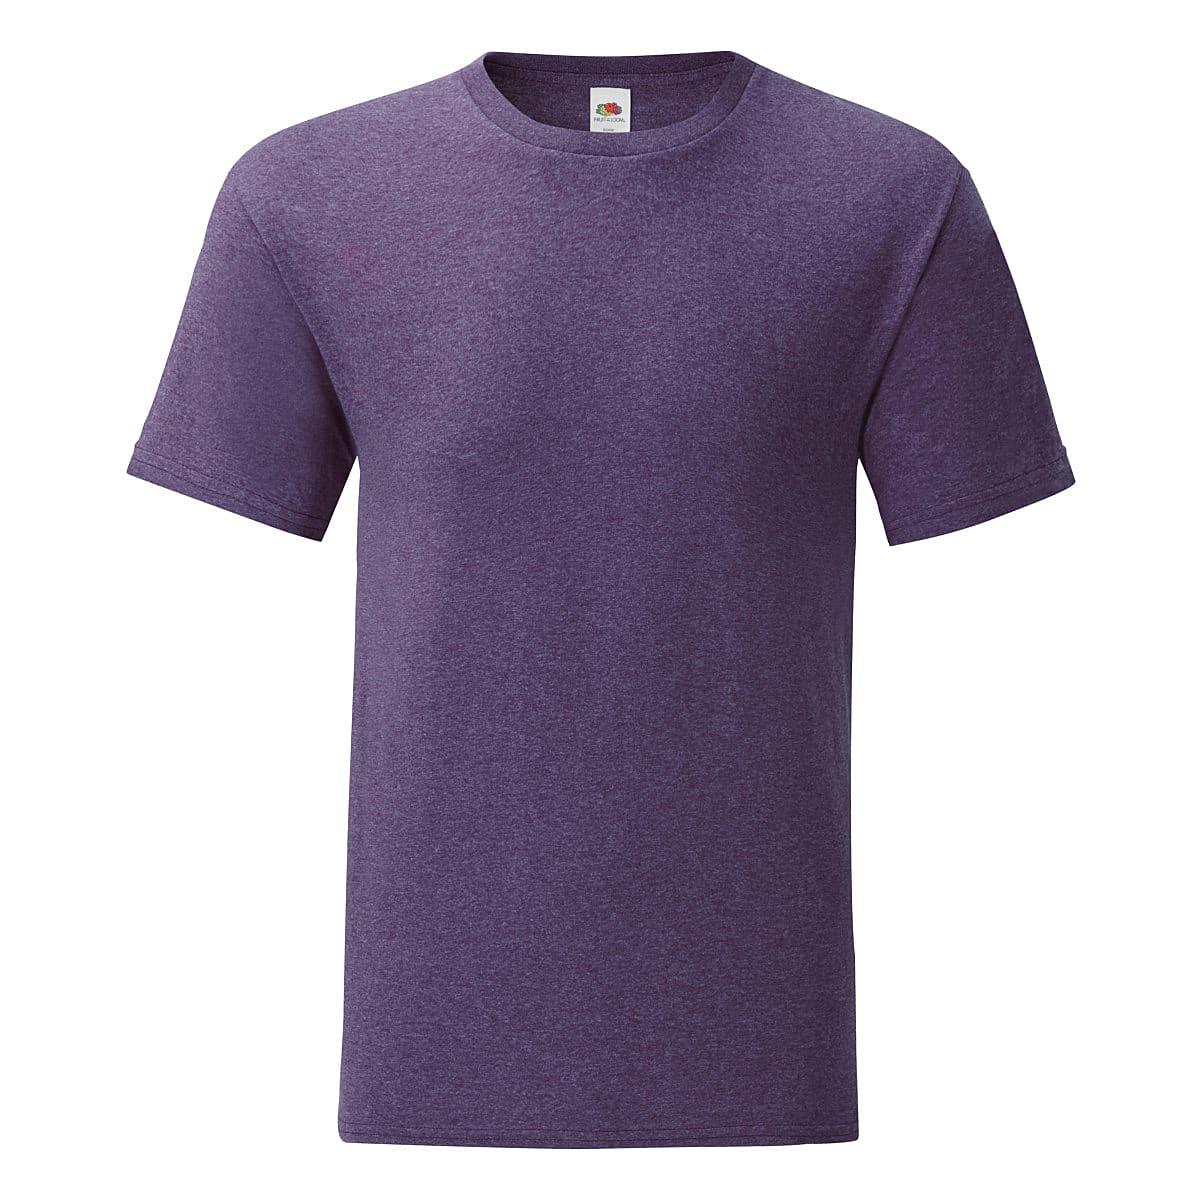 Fruit Of The Loom Mens Iconic T-Shirt in Heather Purple (Product Code: 61430)